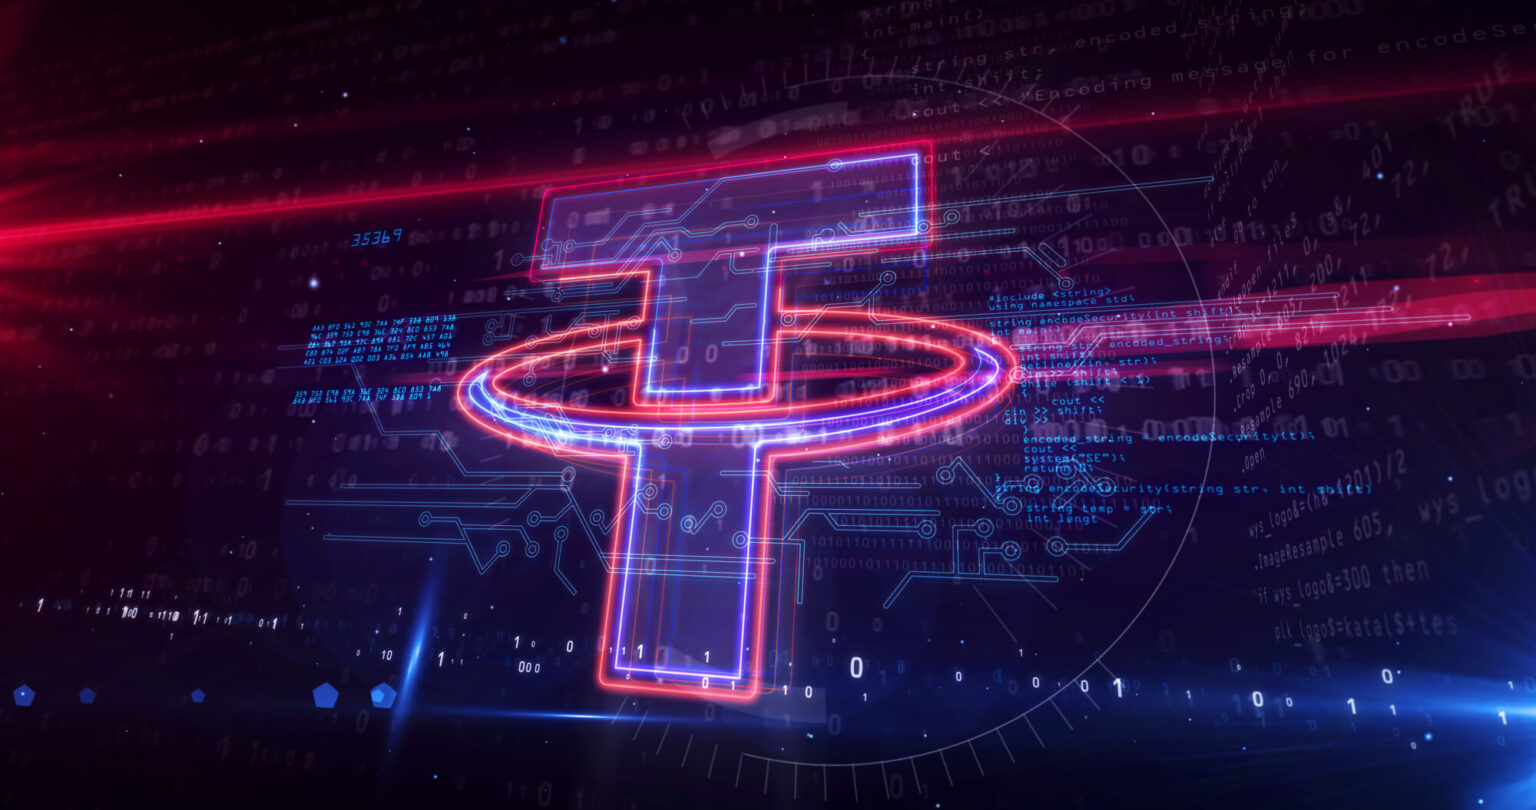 Tether's liquidity called into question after FTX collapse